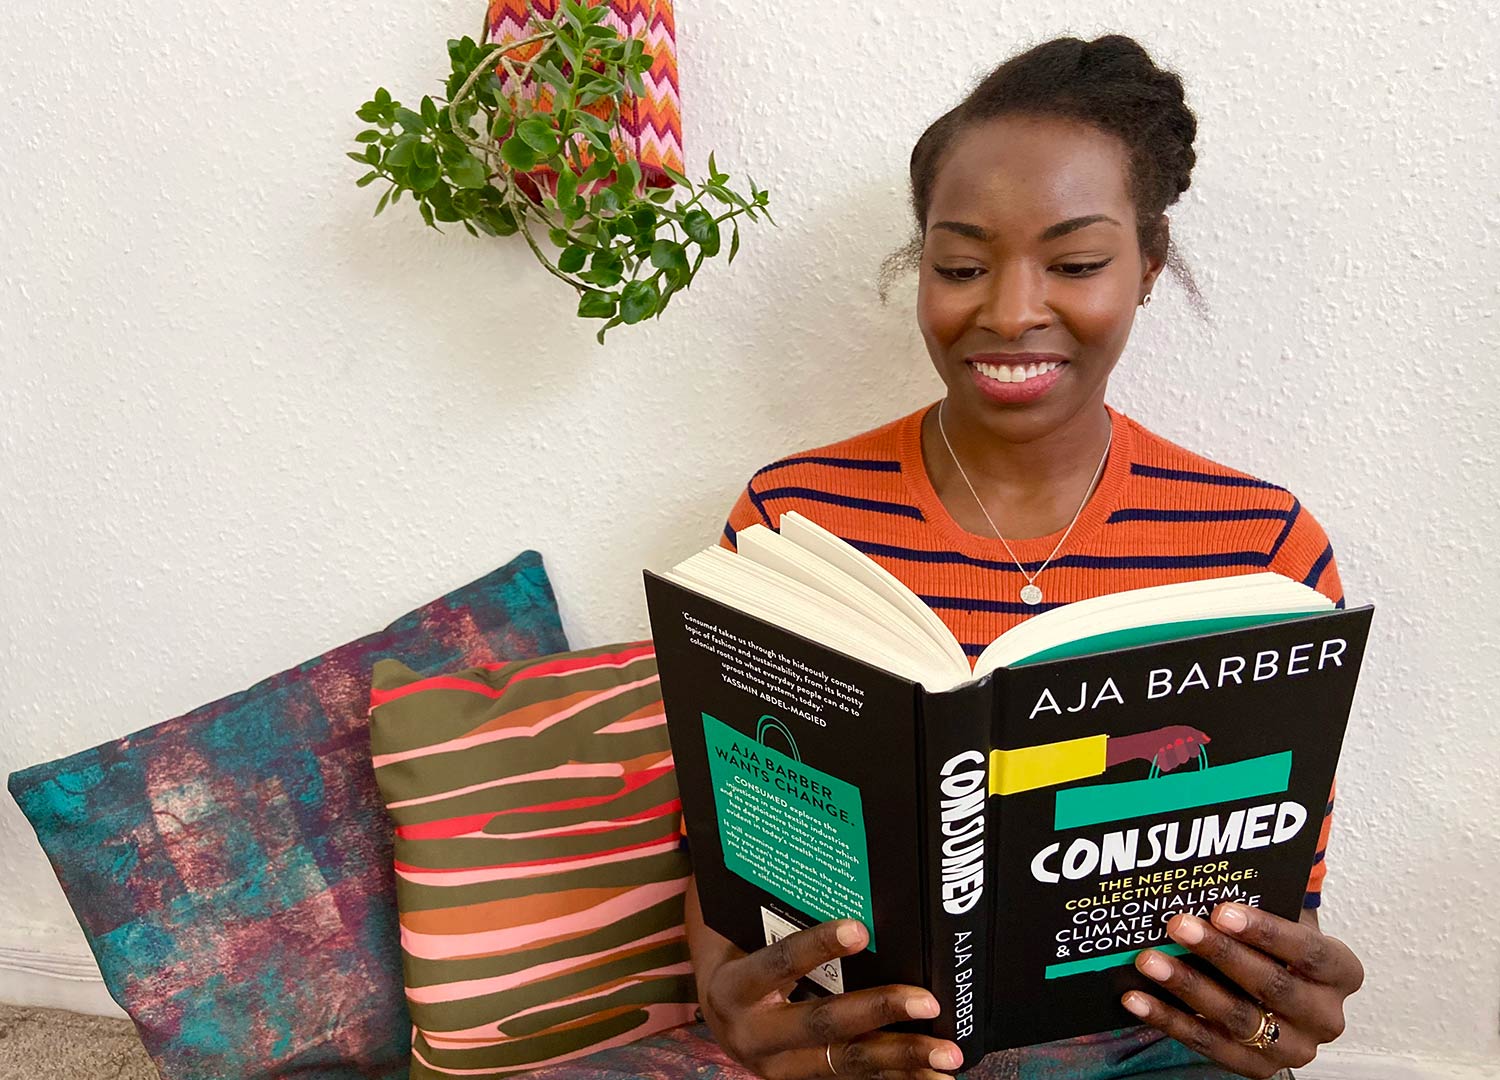 a model holds Aja Barber's book consumed and there are pillows behind her